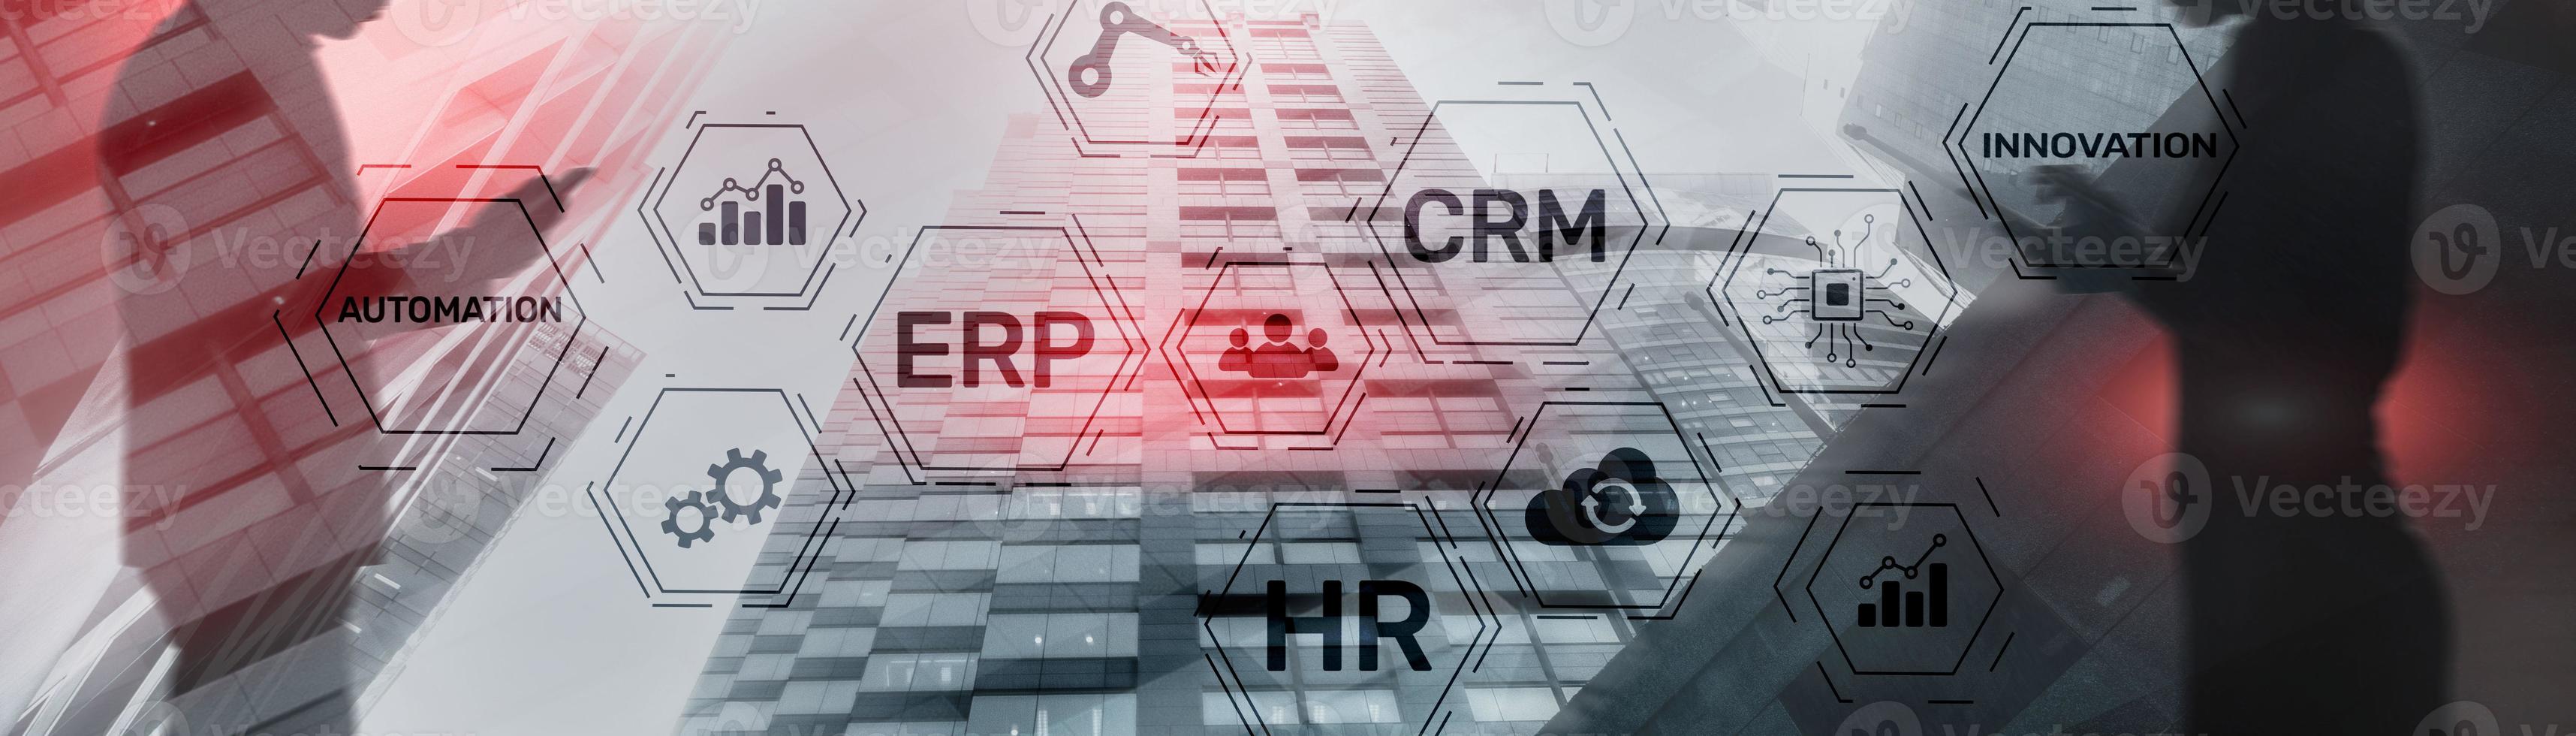 Erp Crm Hr Innovation inscriptions and icons on business background. photo